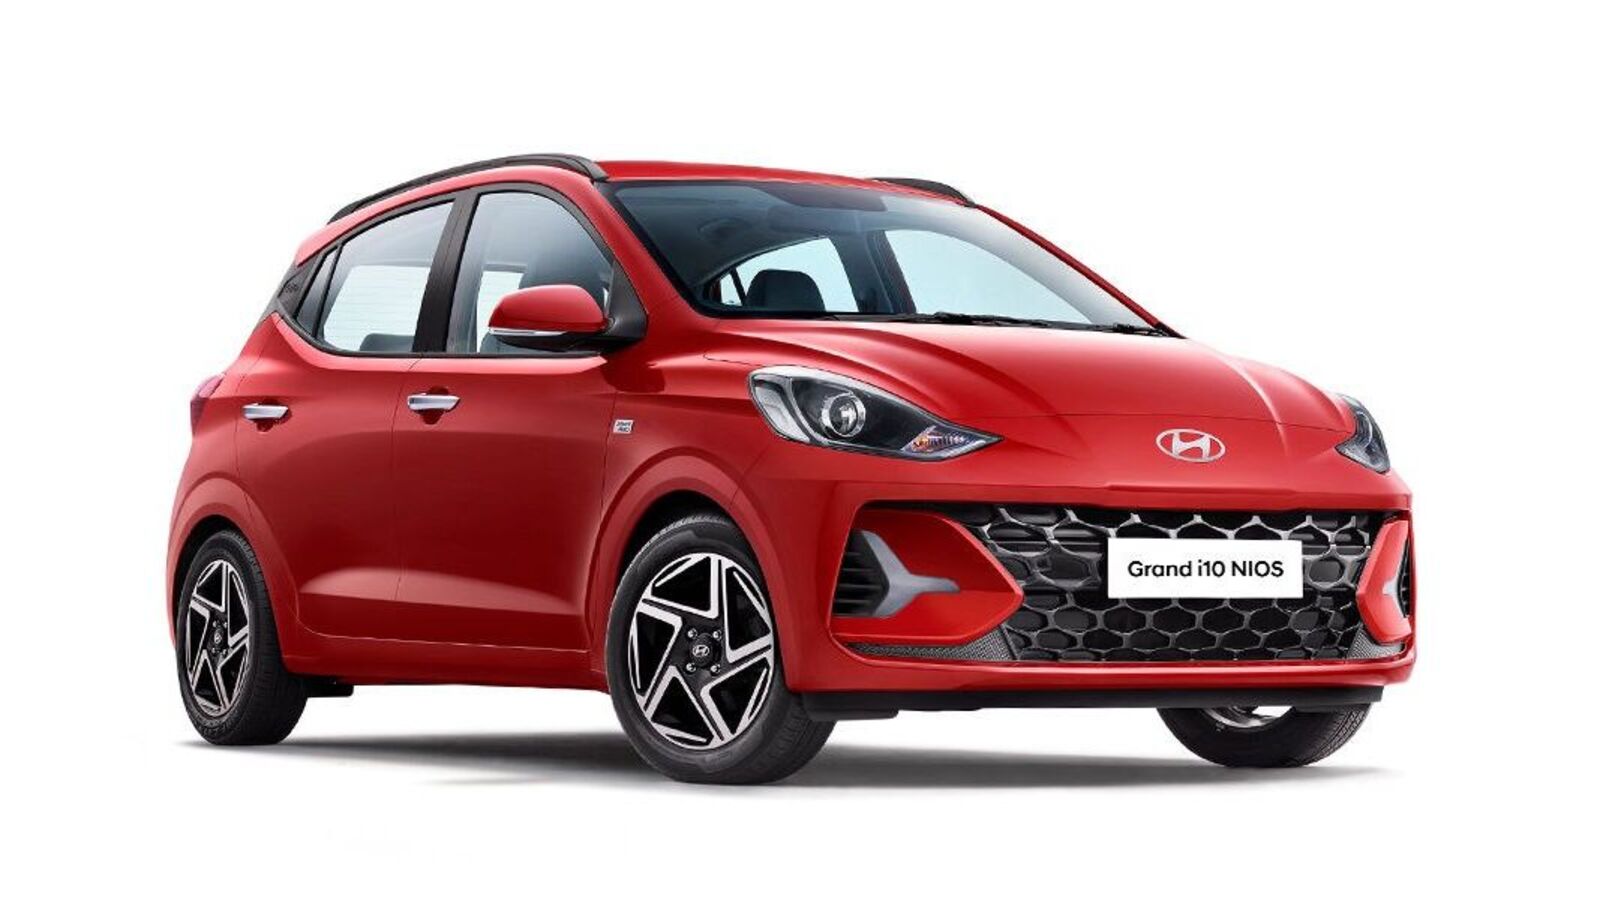 Hyundai unveils Grand i10 Nios facelift, likely to launch at Auto Expo